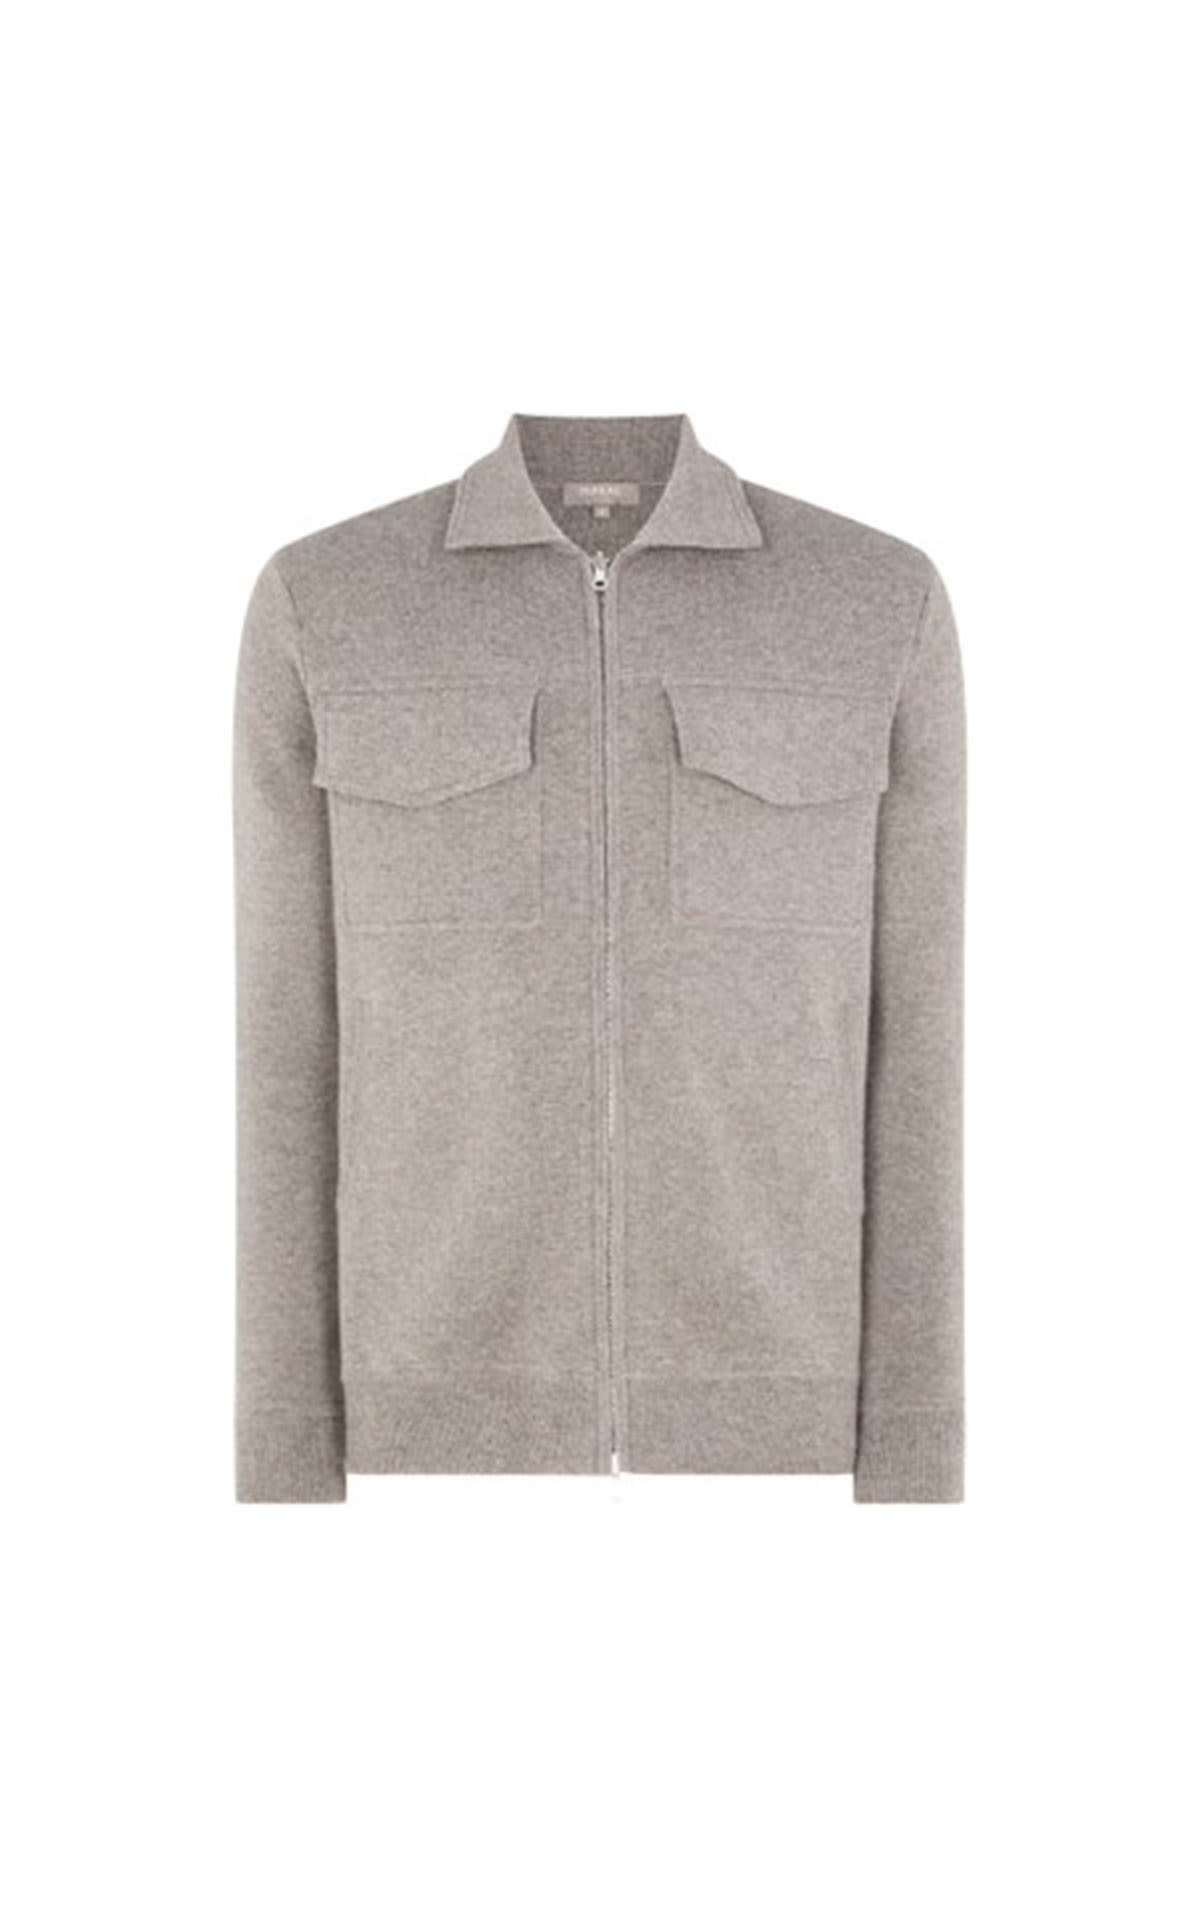 N.Peal Wool blended trucker jacket taupe from Bicester Village